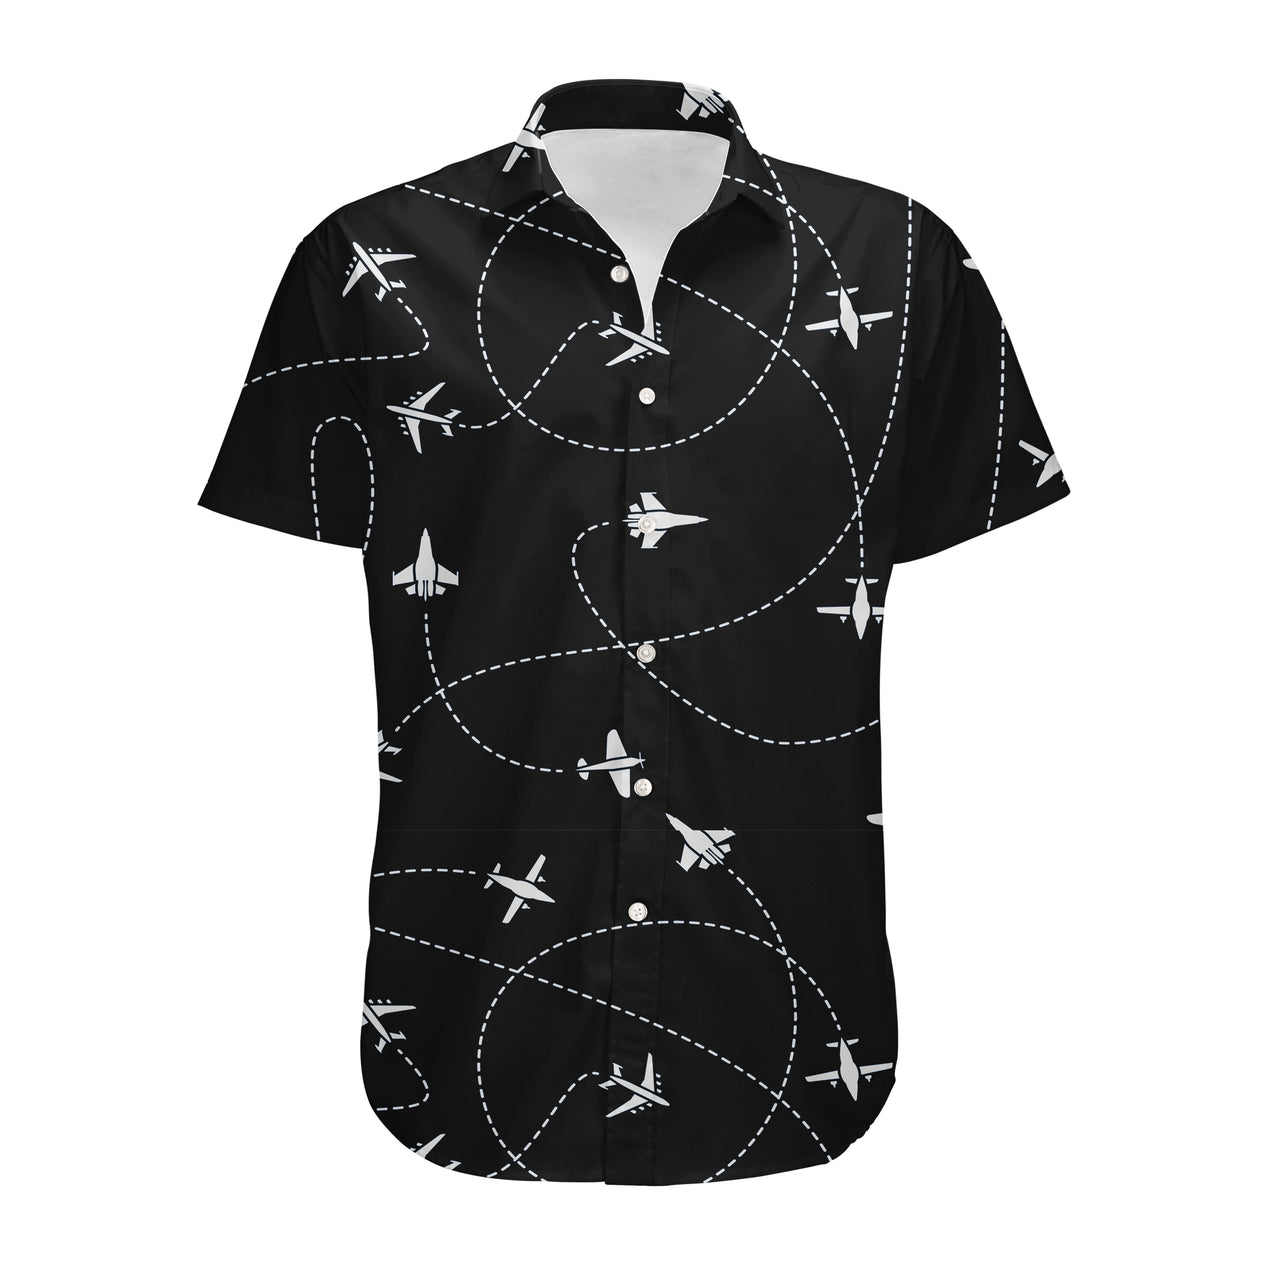 Travel The World By Plane (Black) Designed 3D Shirts